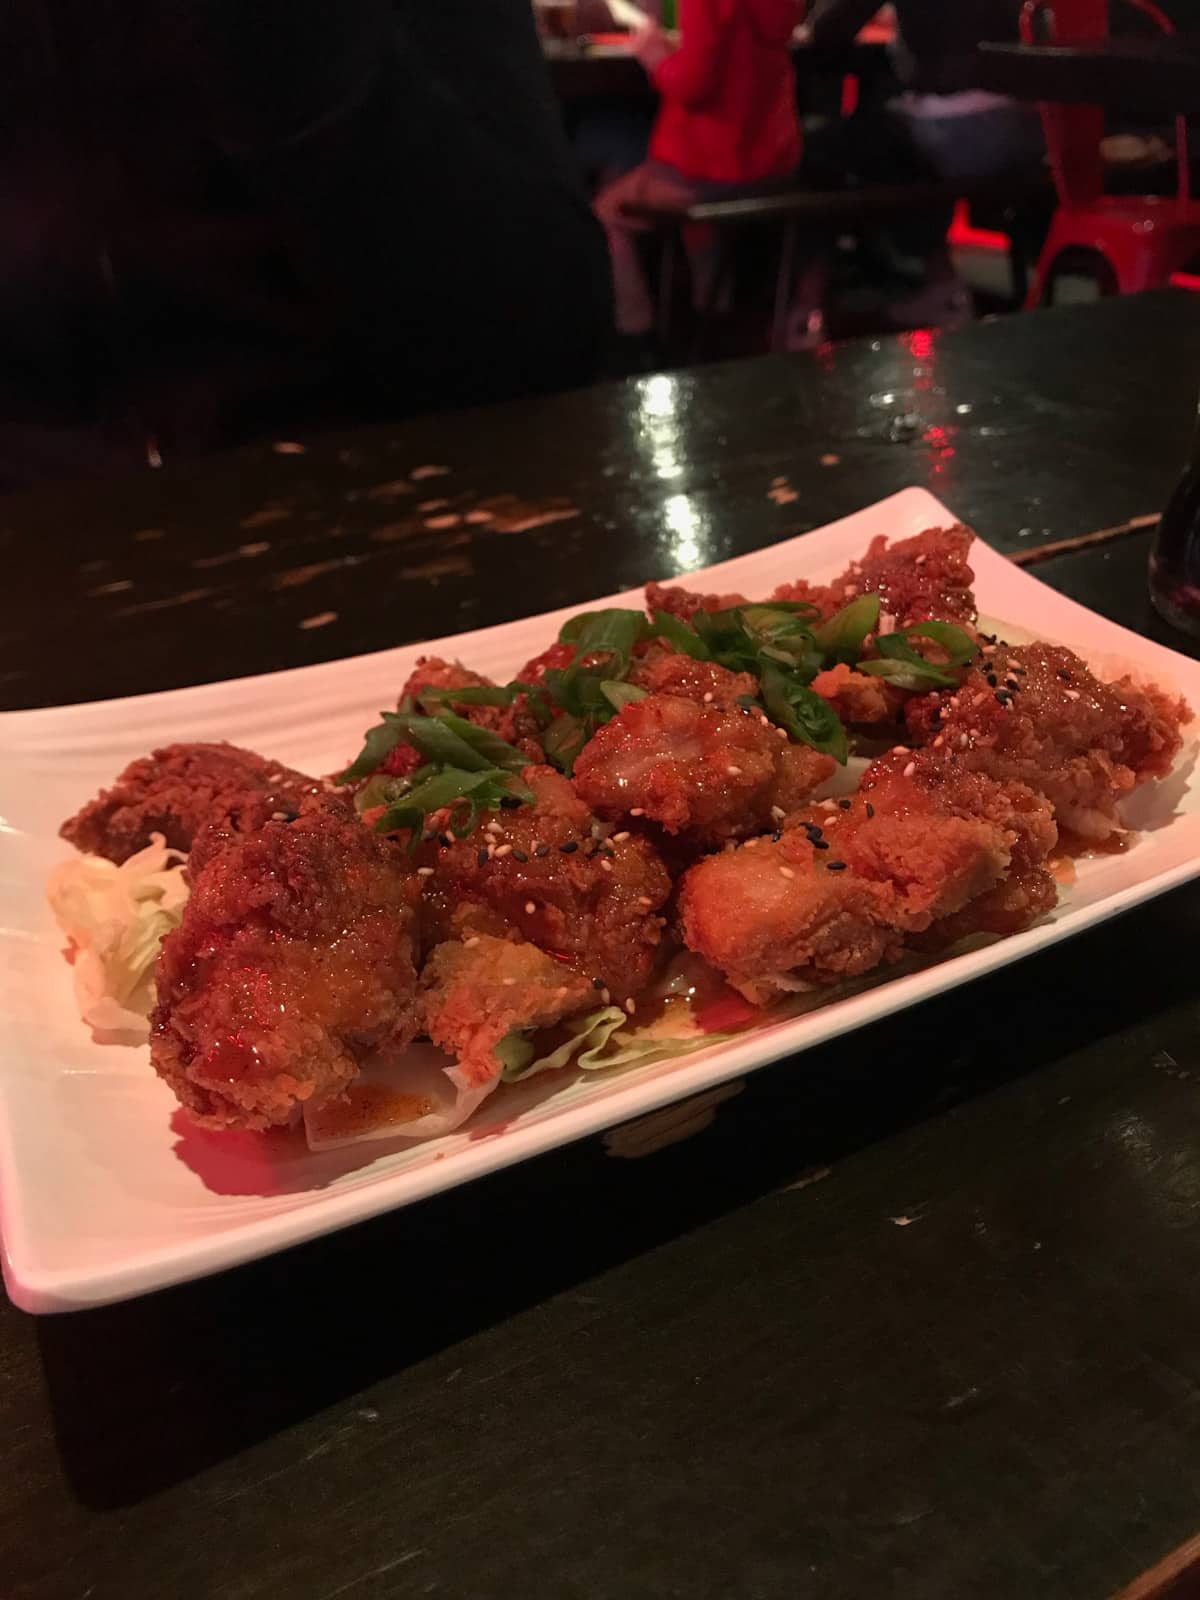 Fried chicken on a rectangular white plate, on a table in a restaurant